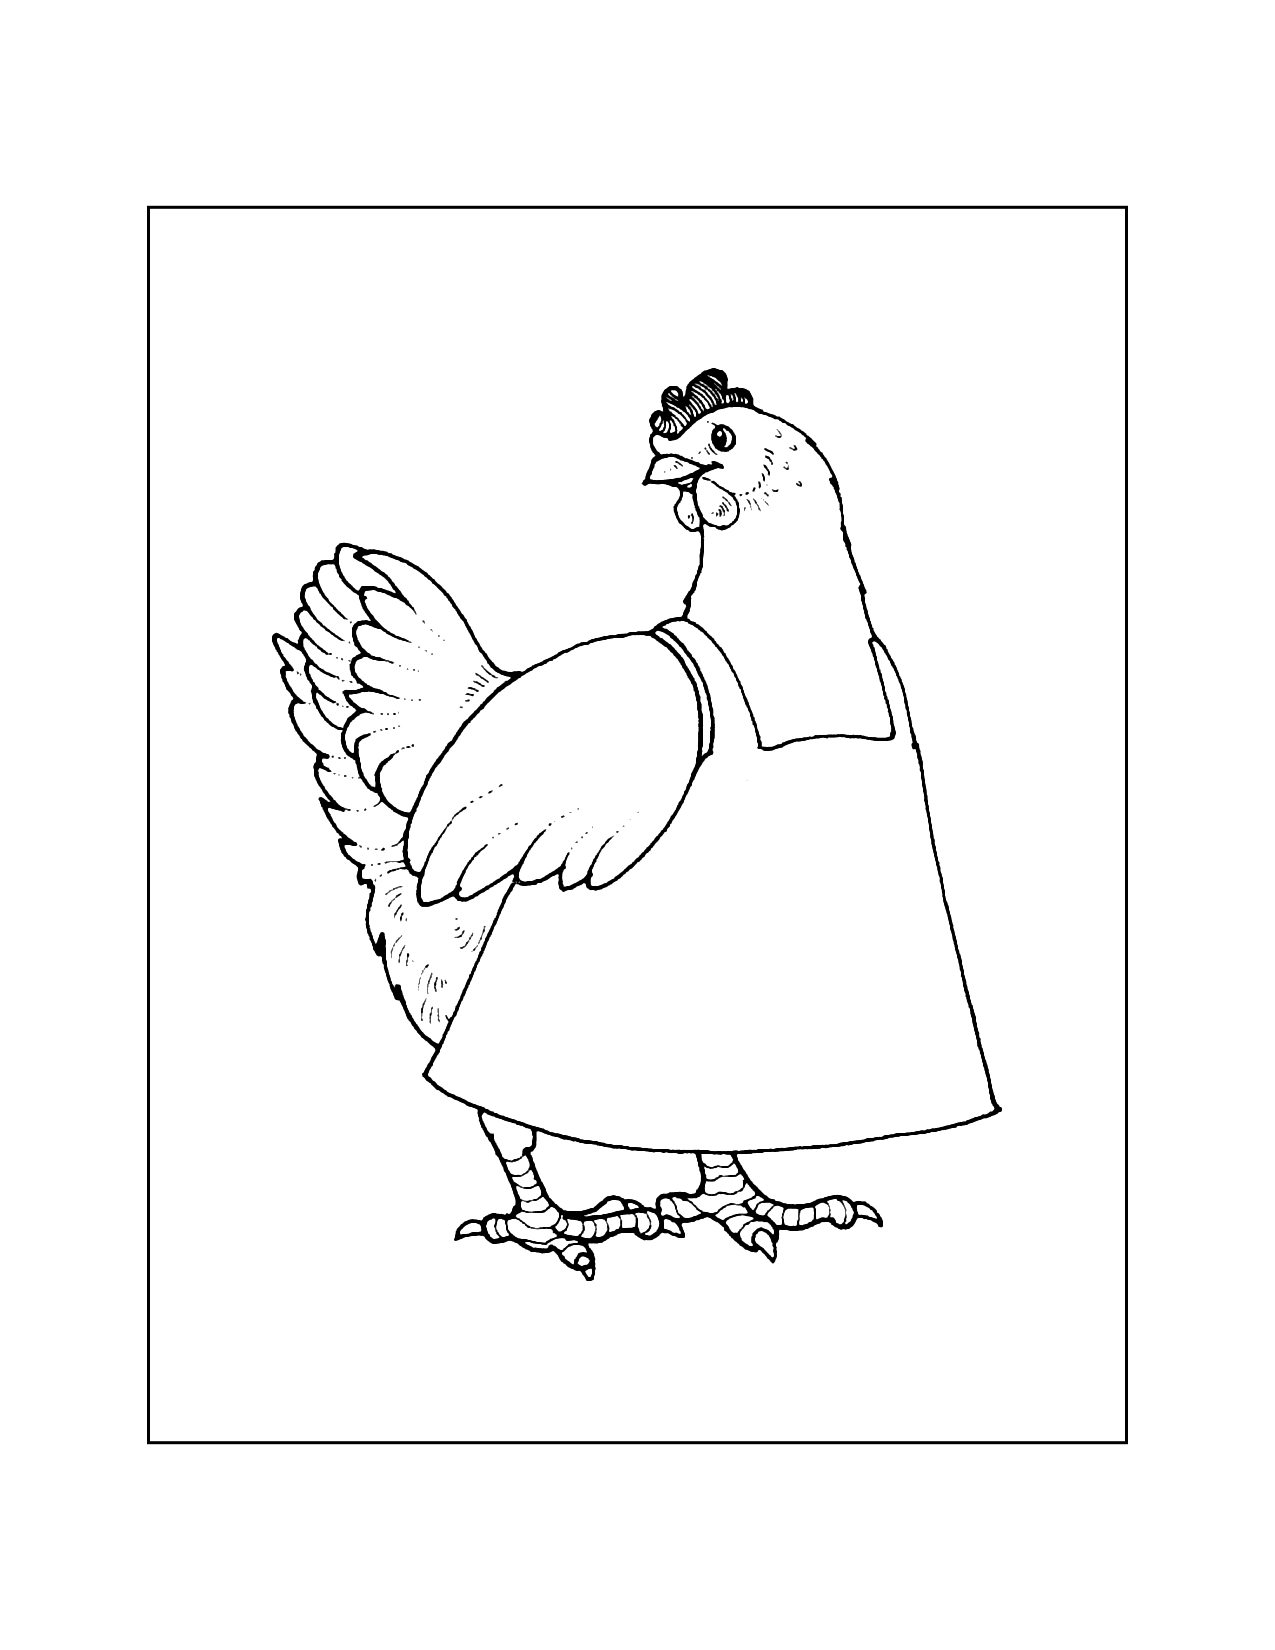 Hen In An Apron Coloring Page